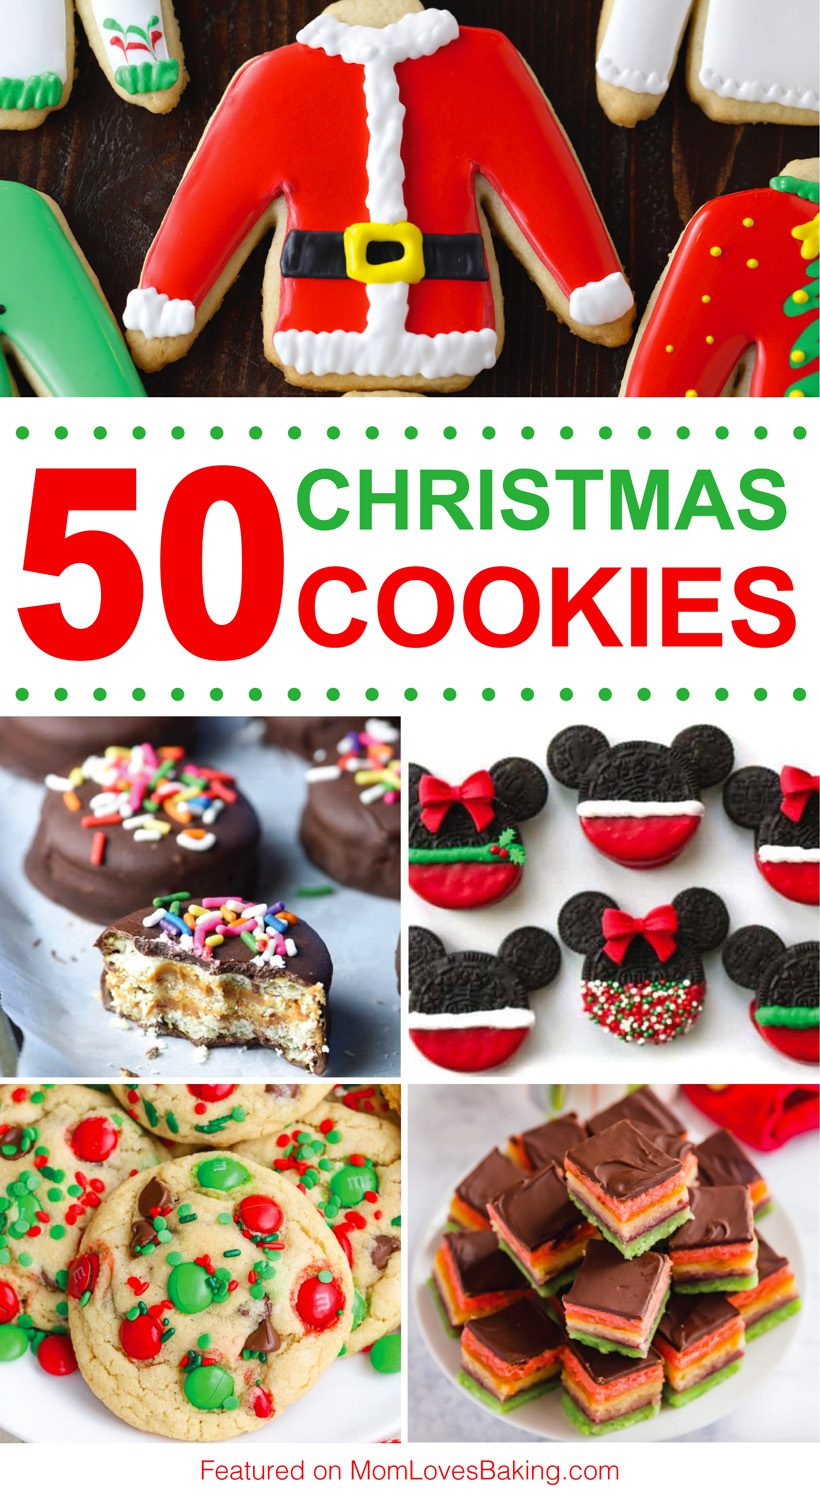 50 fabulous Christmas cookie recipes